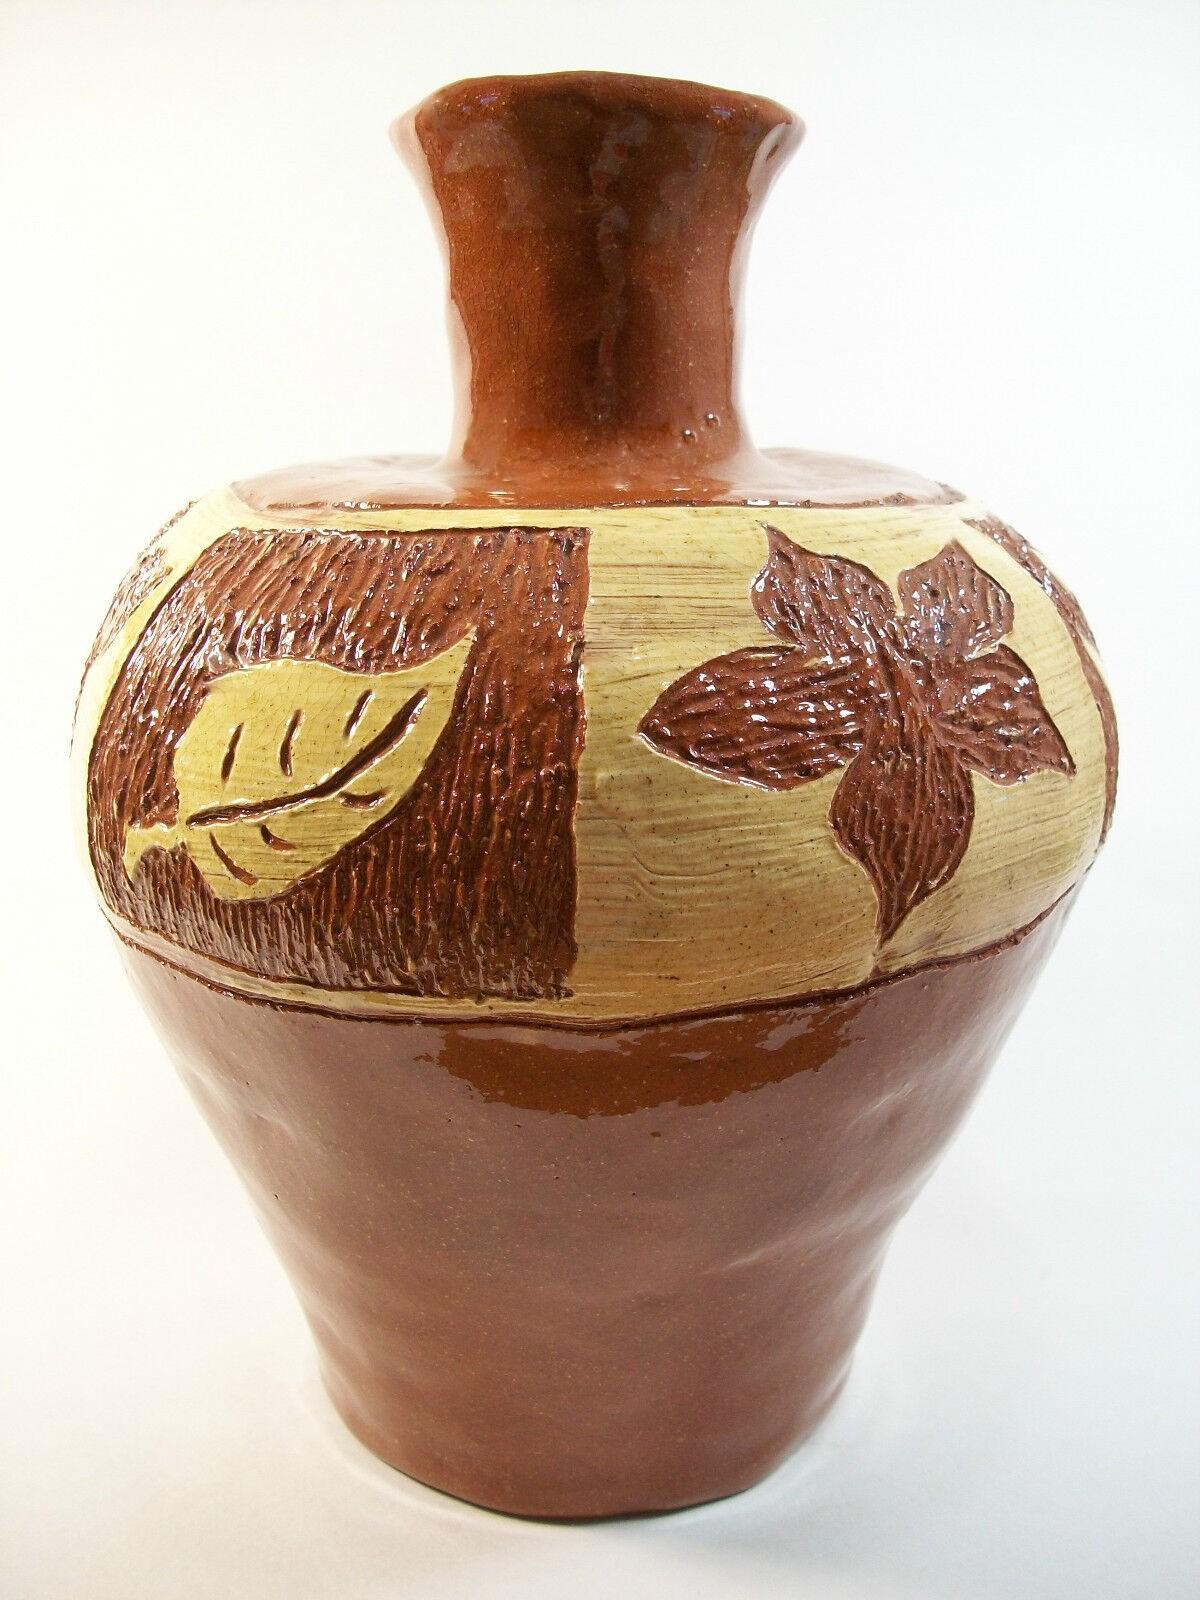 Vintage studio pottery folk art terracotta vase with clear glaze - yellow slip sgraffito decorated with stylized flowers and leaves - heavily potted - unsigned - country of origin unknown - mid 20th century.

Excellent vintage condition - no loss